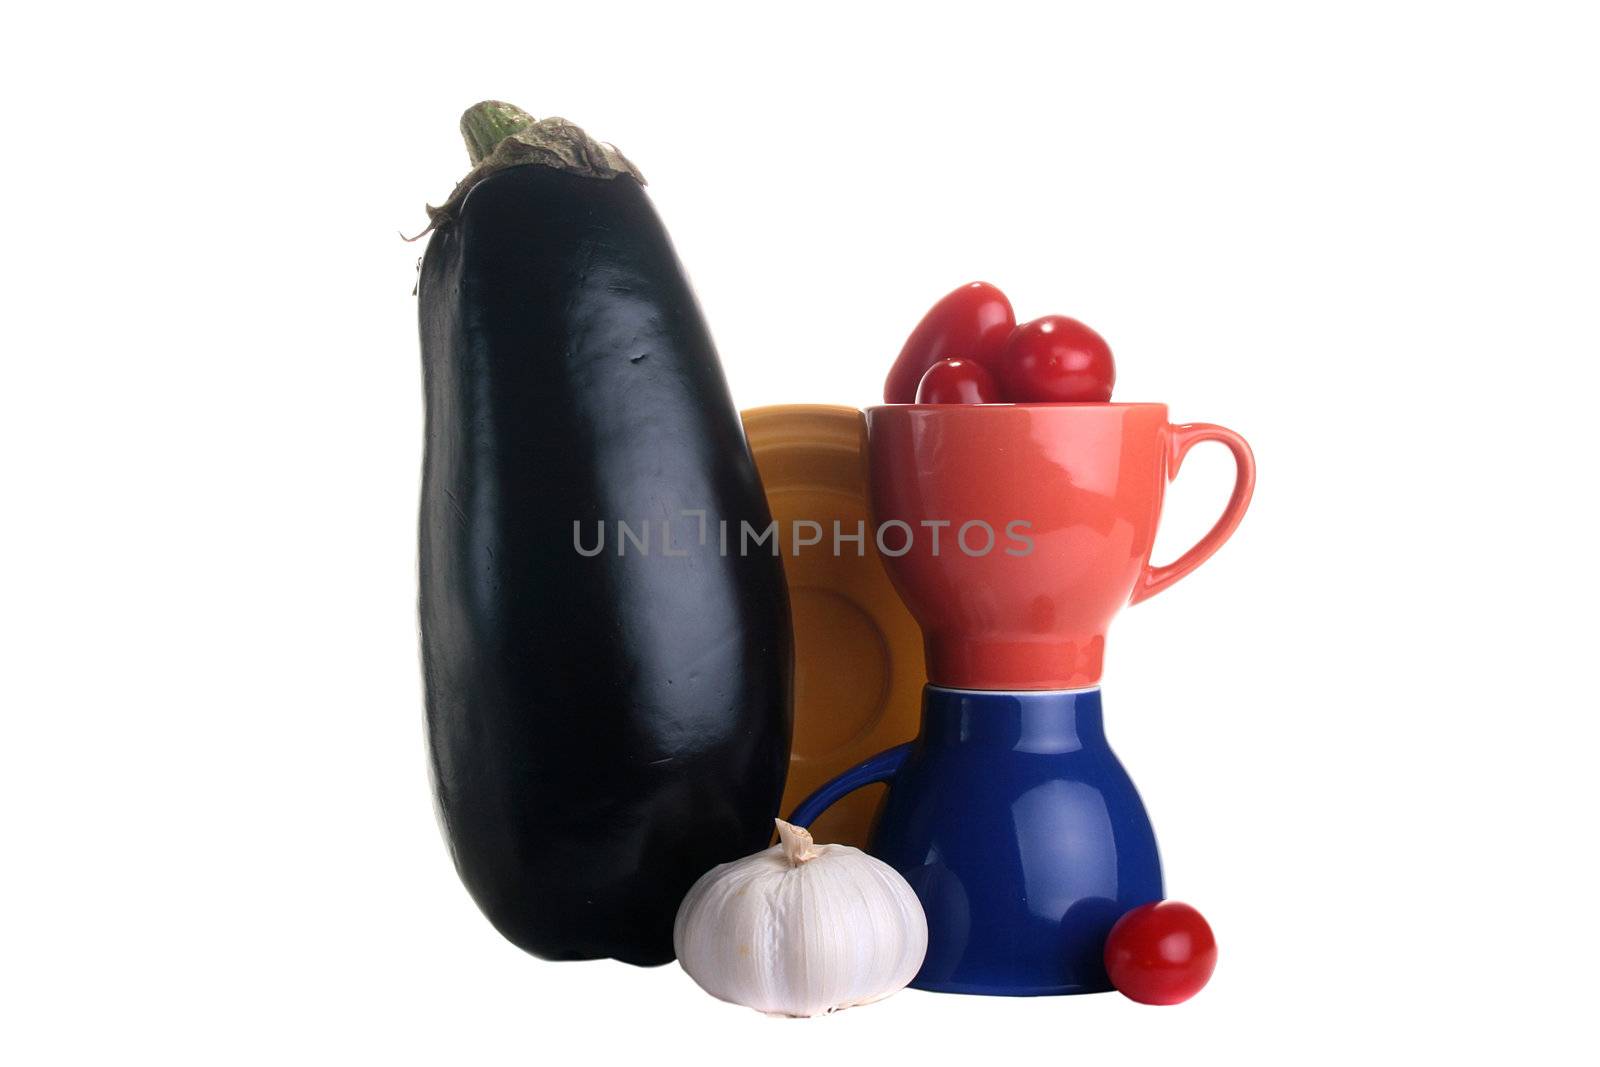 Eggplants with additional vegetables for snack preparation.